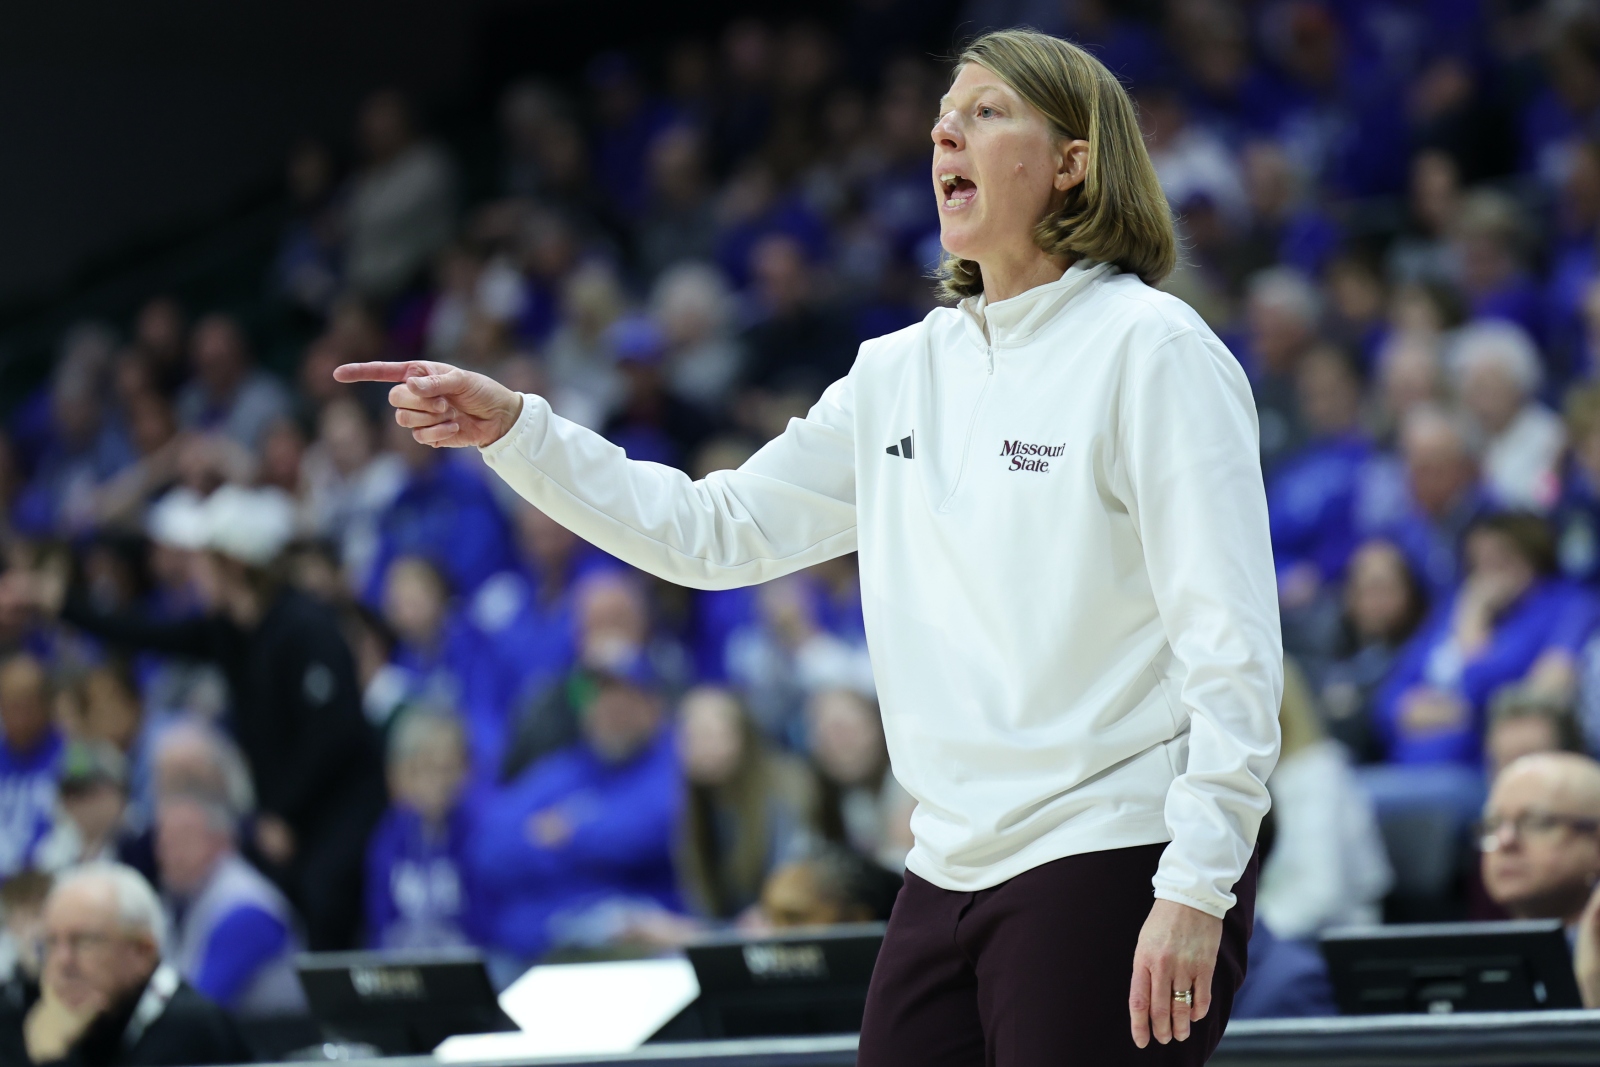 Missouri State Lady Bears basketball coach Beth Cunningham shouts instructions to her team during a game.